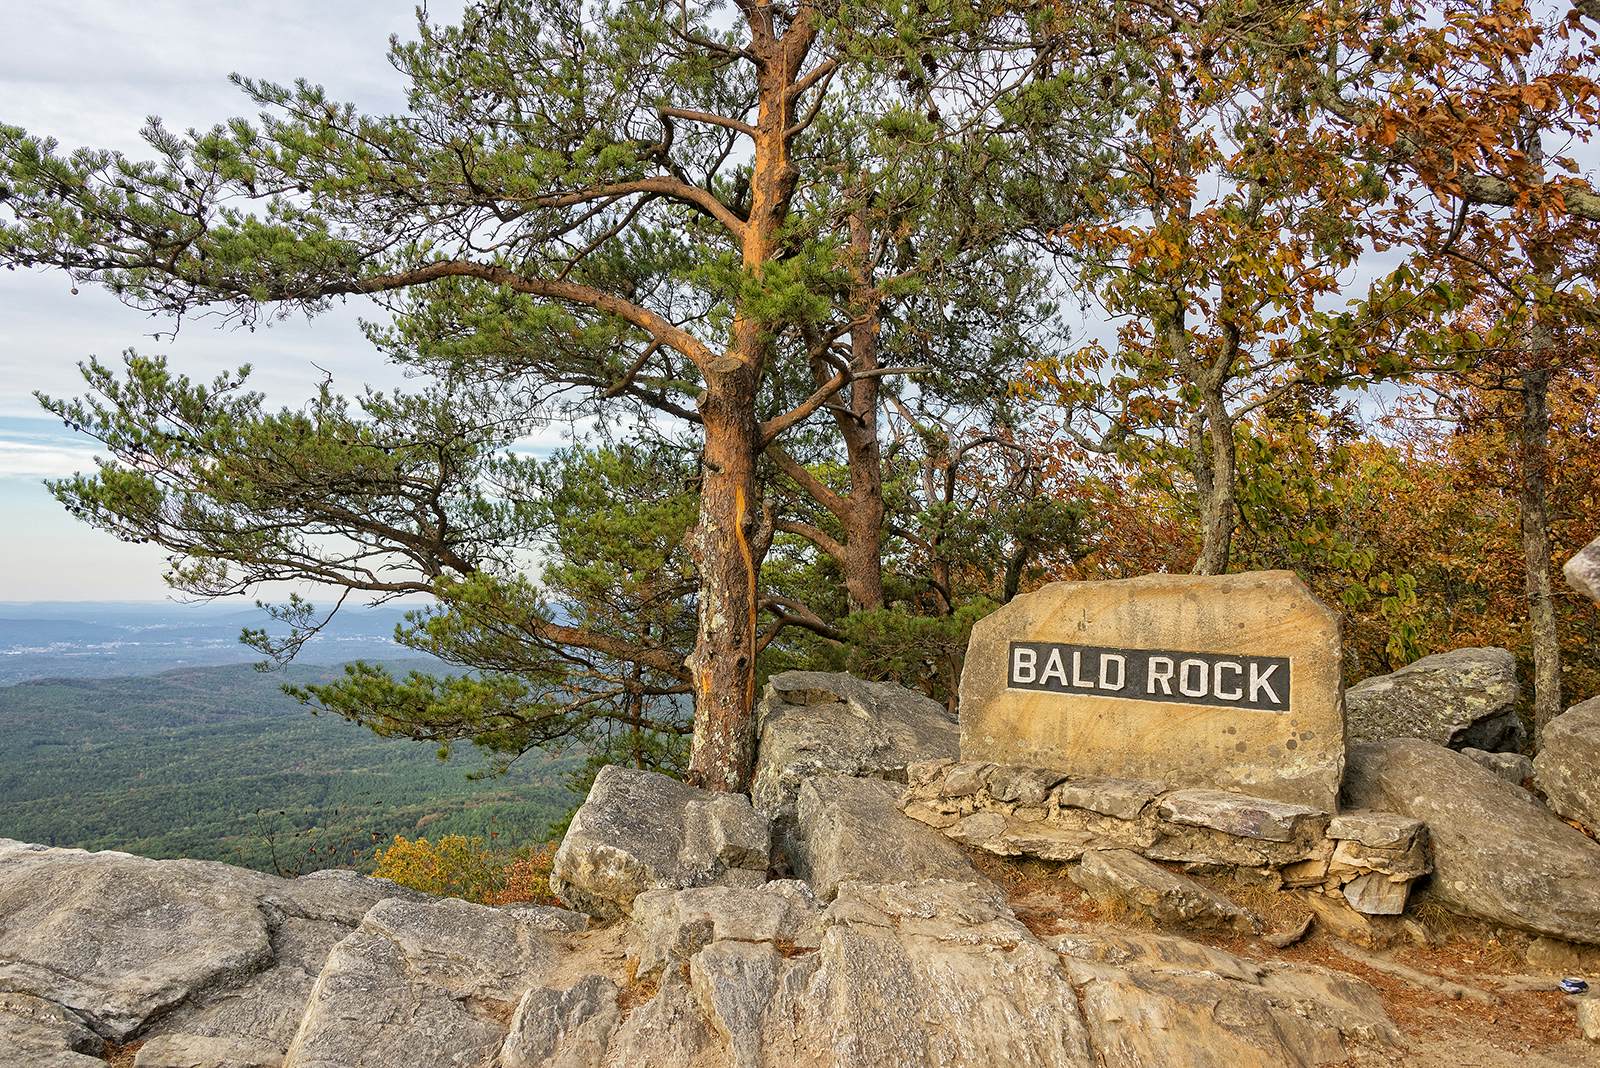 Take a hike: 5 nature escapes in Alabama – Lonely Planet - Lonely